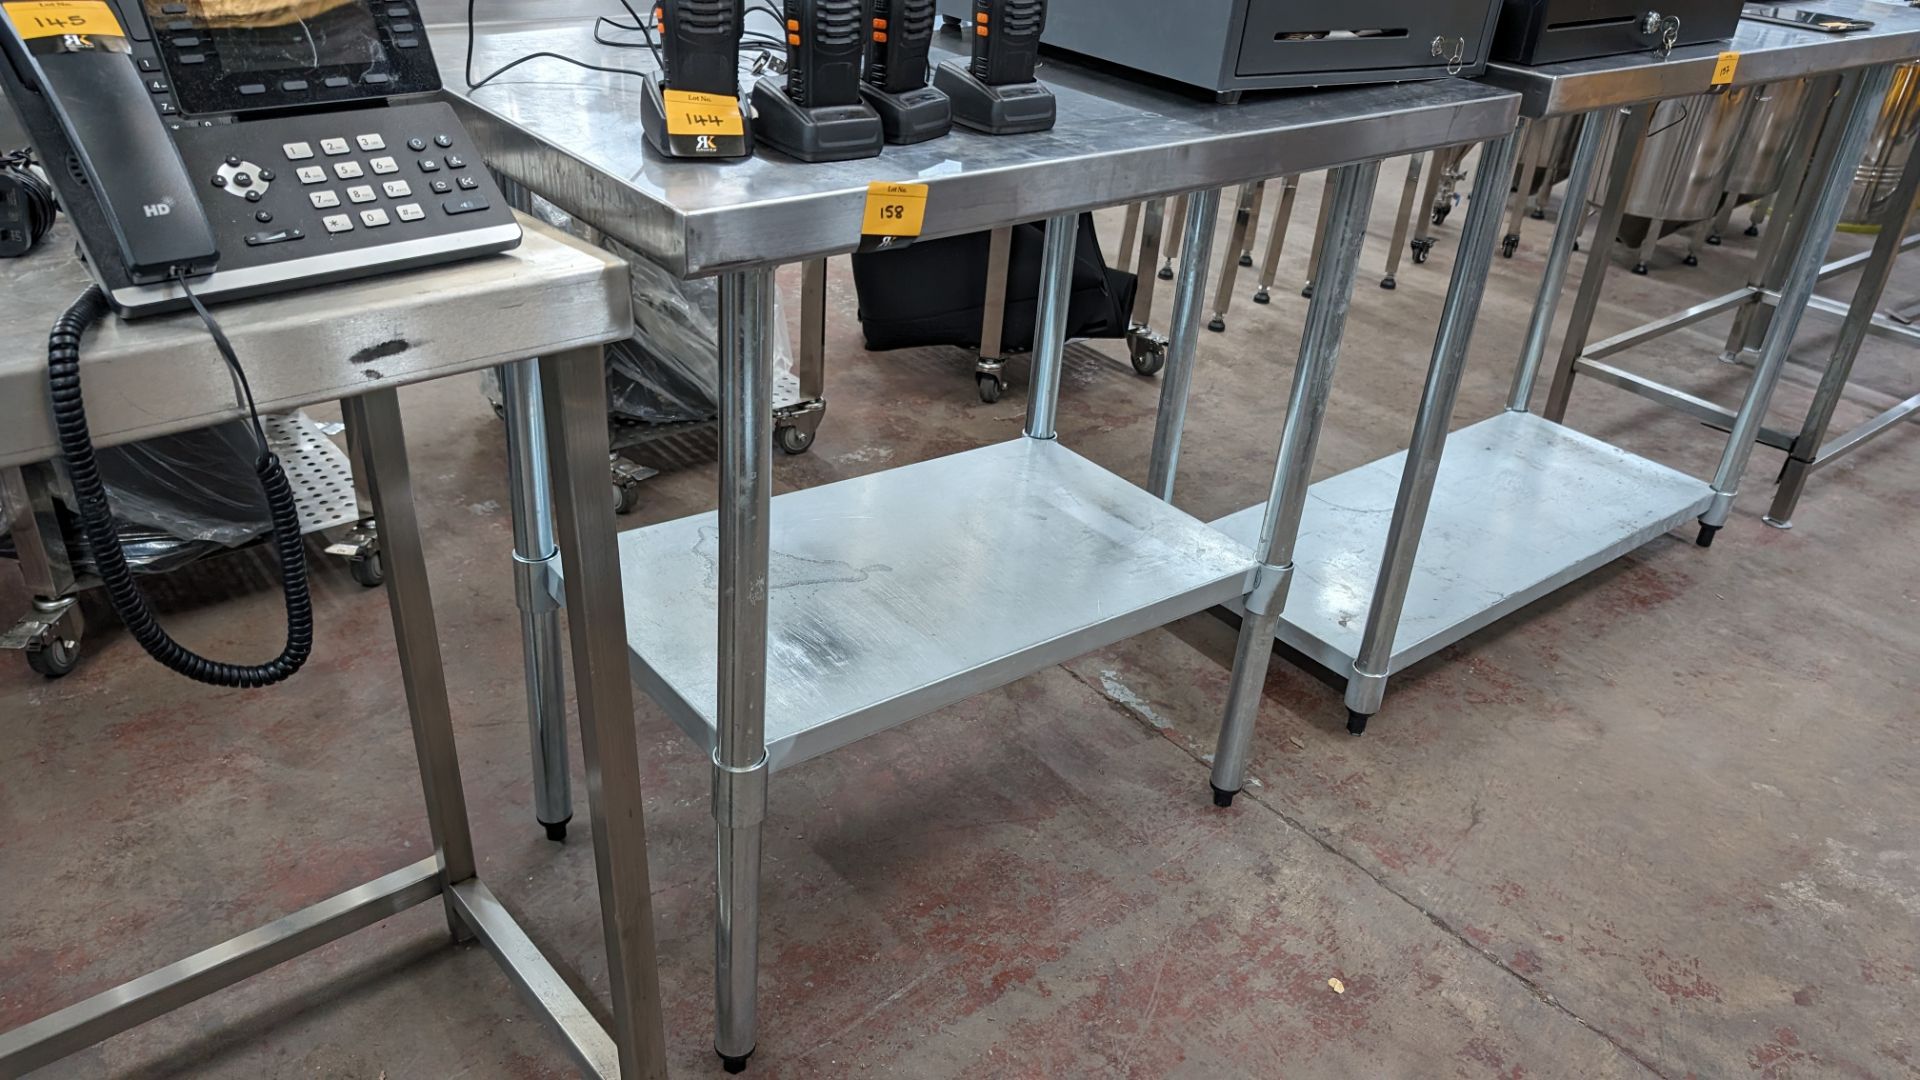 Stainless steel twin tier table with upstand at rear, max dimensions: 940mm x 610mm x 915mm - Image 3 of 3